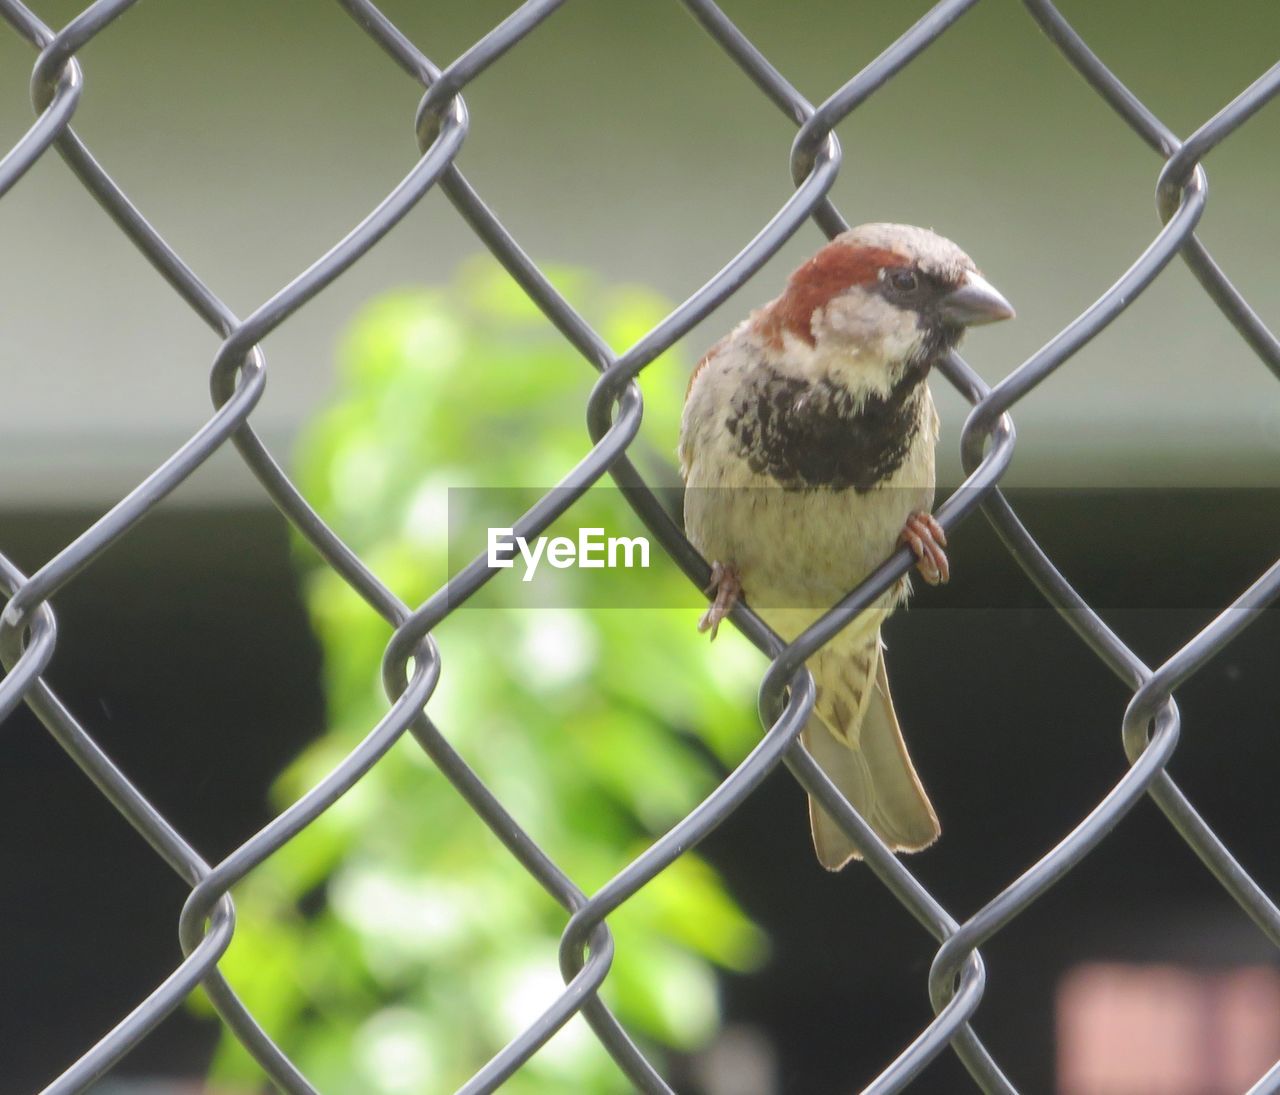 BIRD PERCHING ON CHAINLINK FENCE